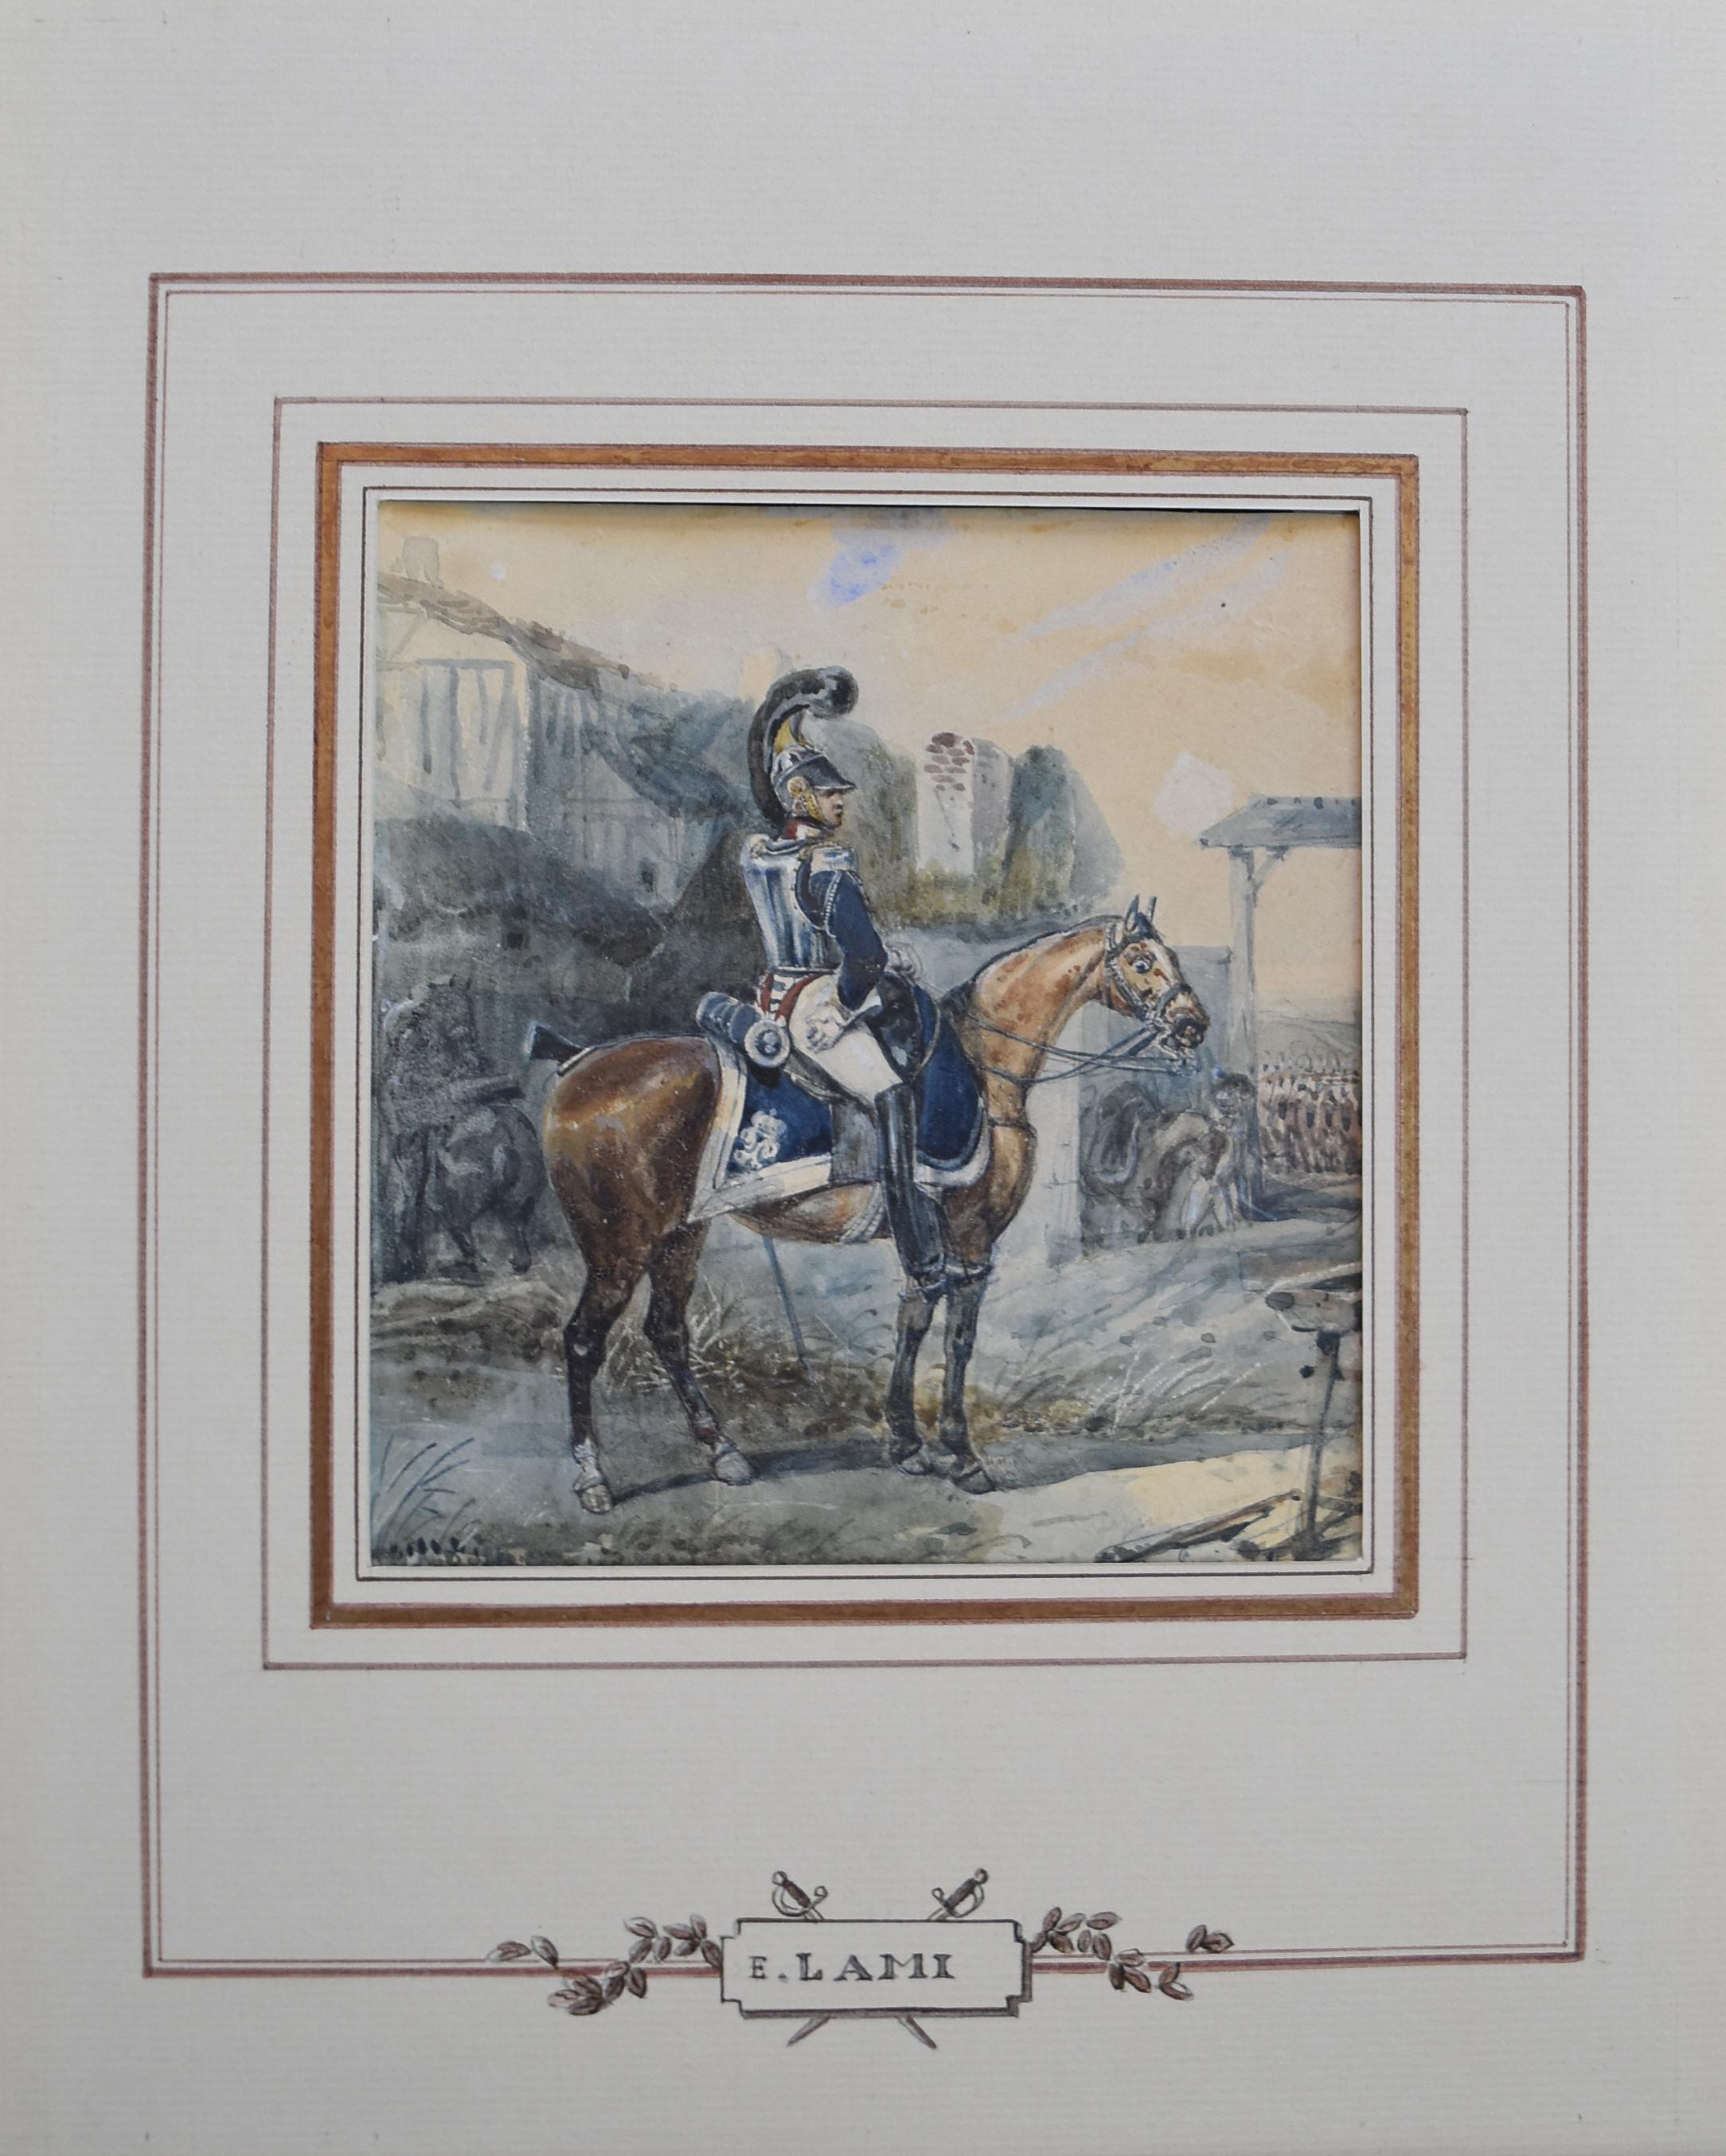 Attributed to Eugene Lami, a Hussar on his horse, watercolor - Old Masters Art by Unknown